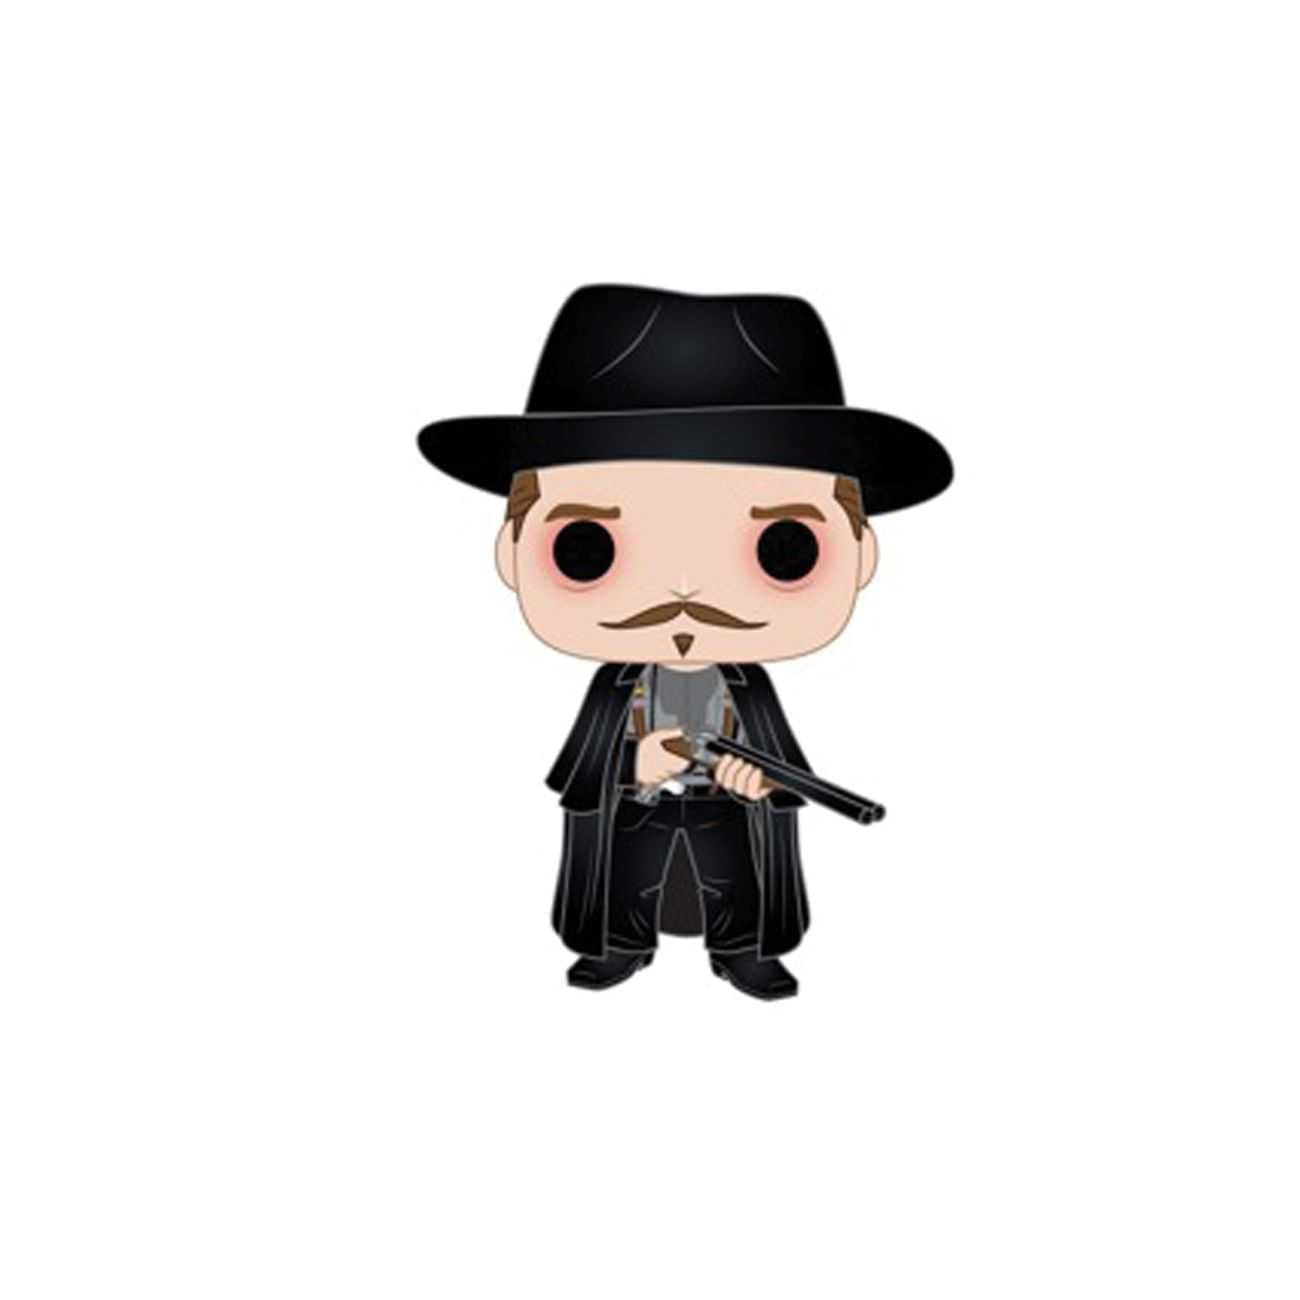 Funko Weekly Round Up – Funko Shop Exclusives, Game of Thrones and More